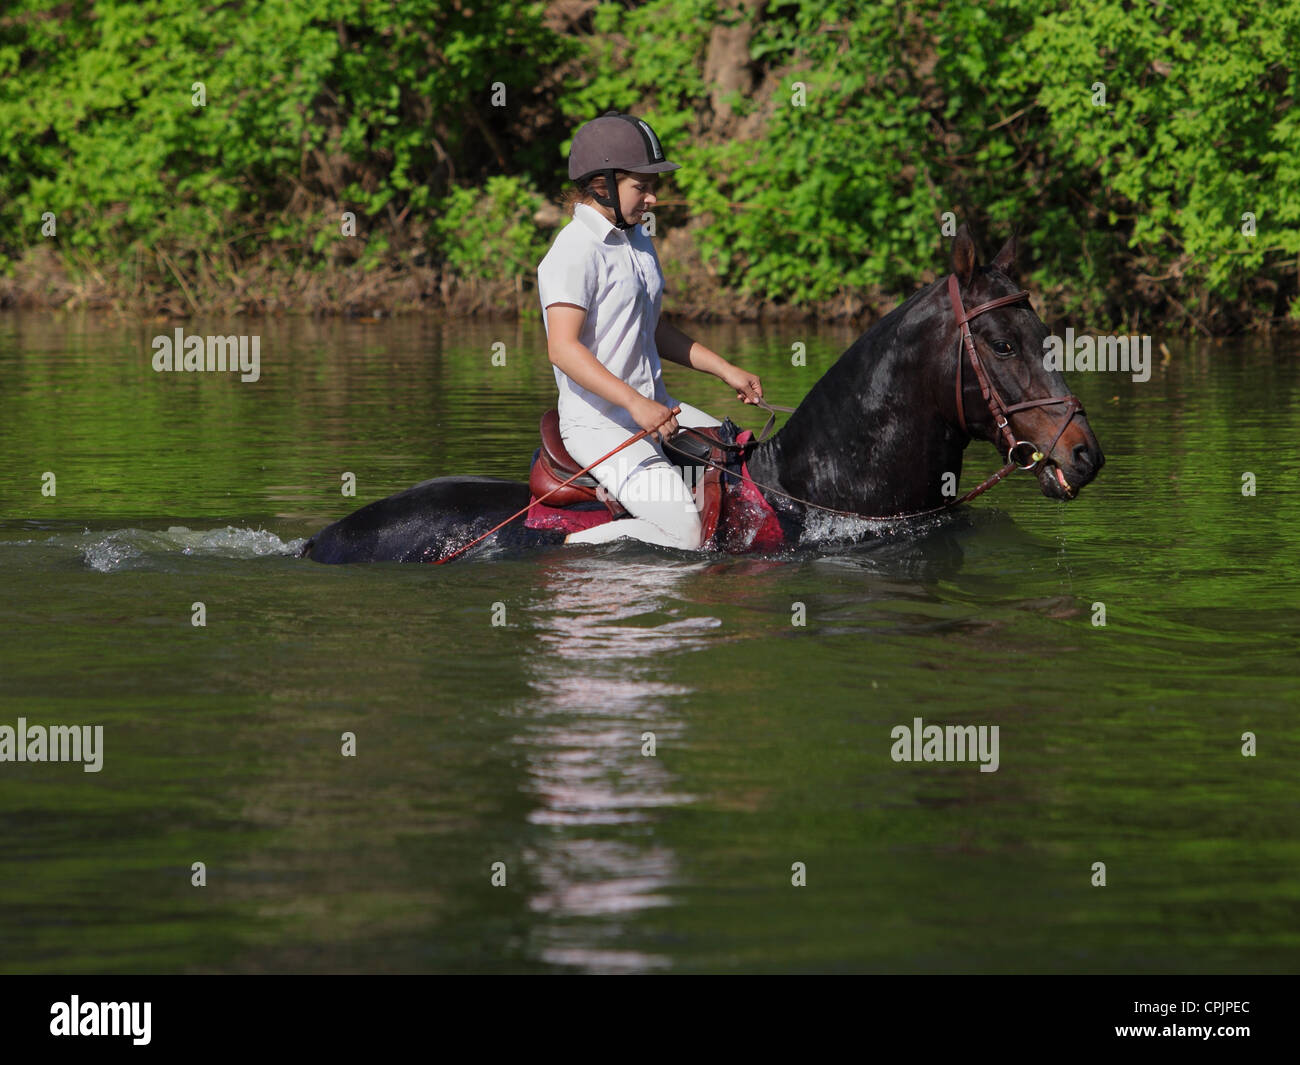 Equestrian girl and Horse float in River Stock Photo